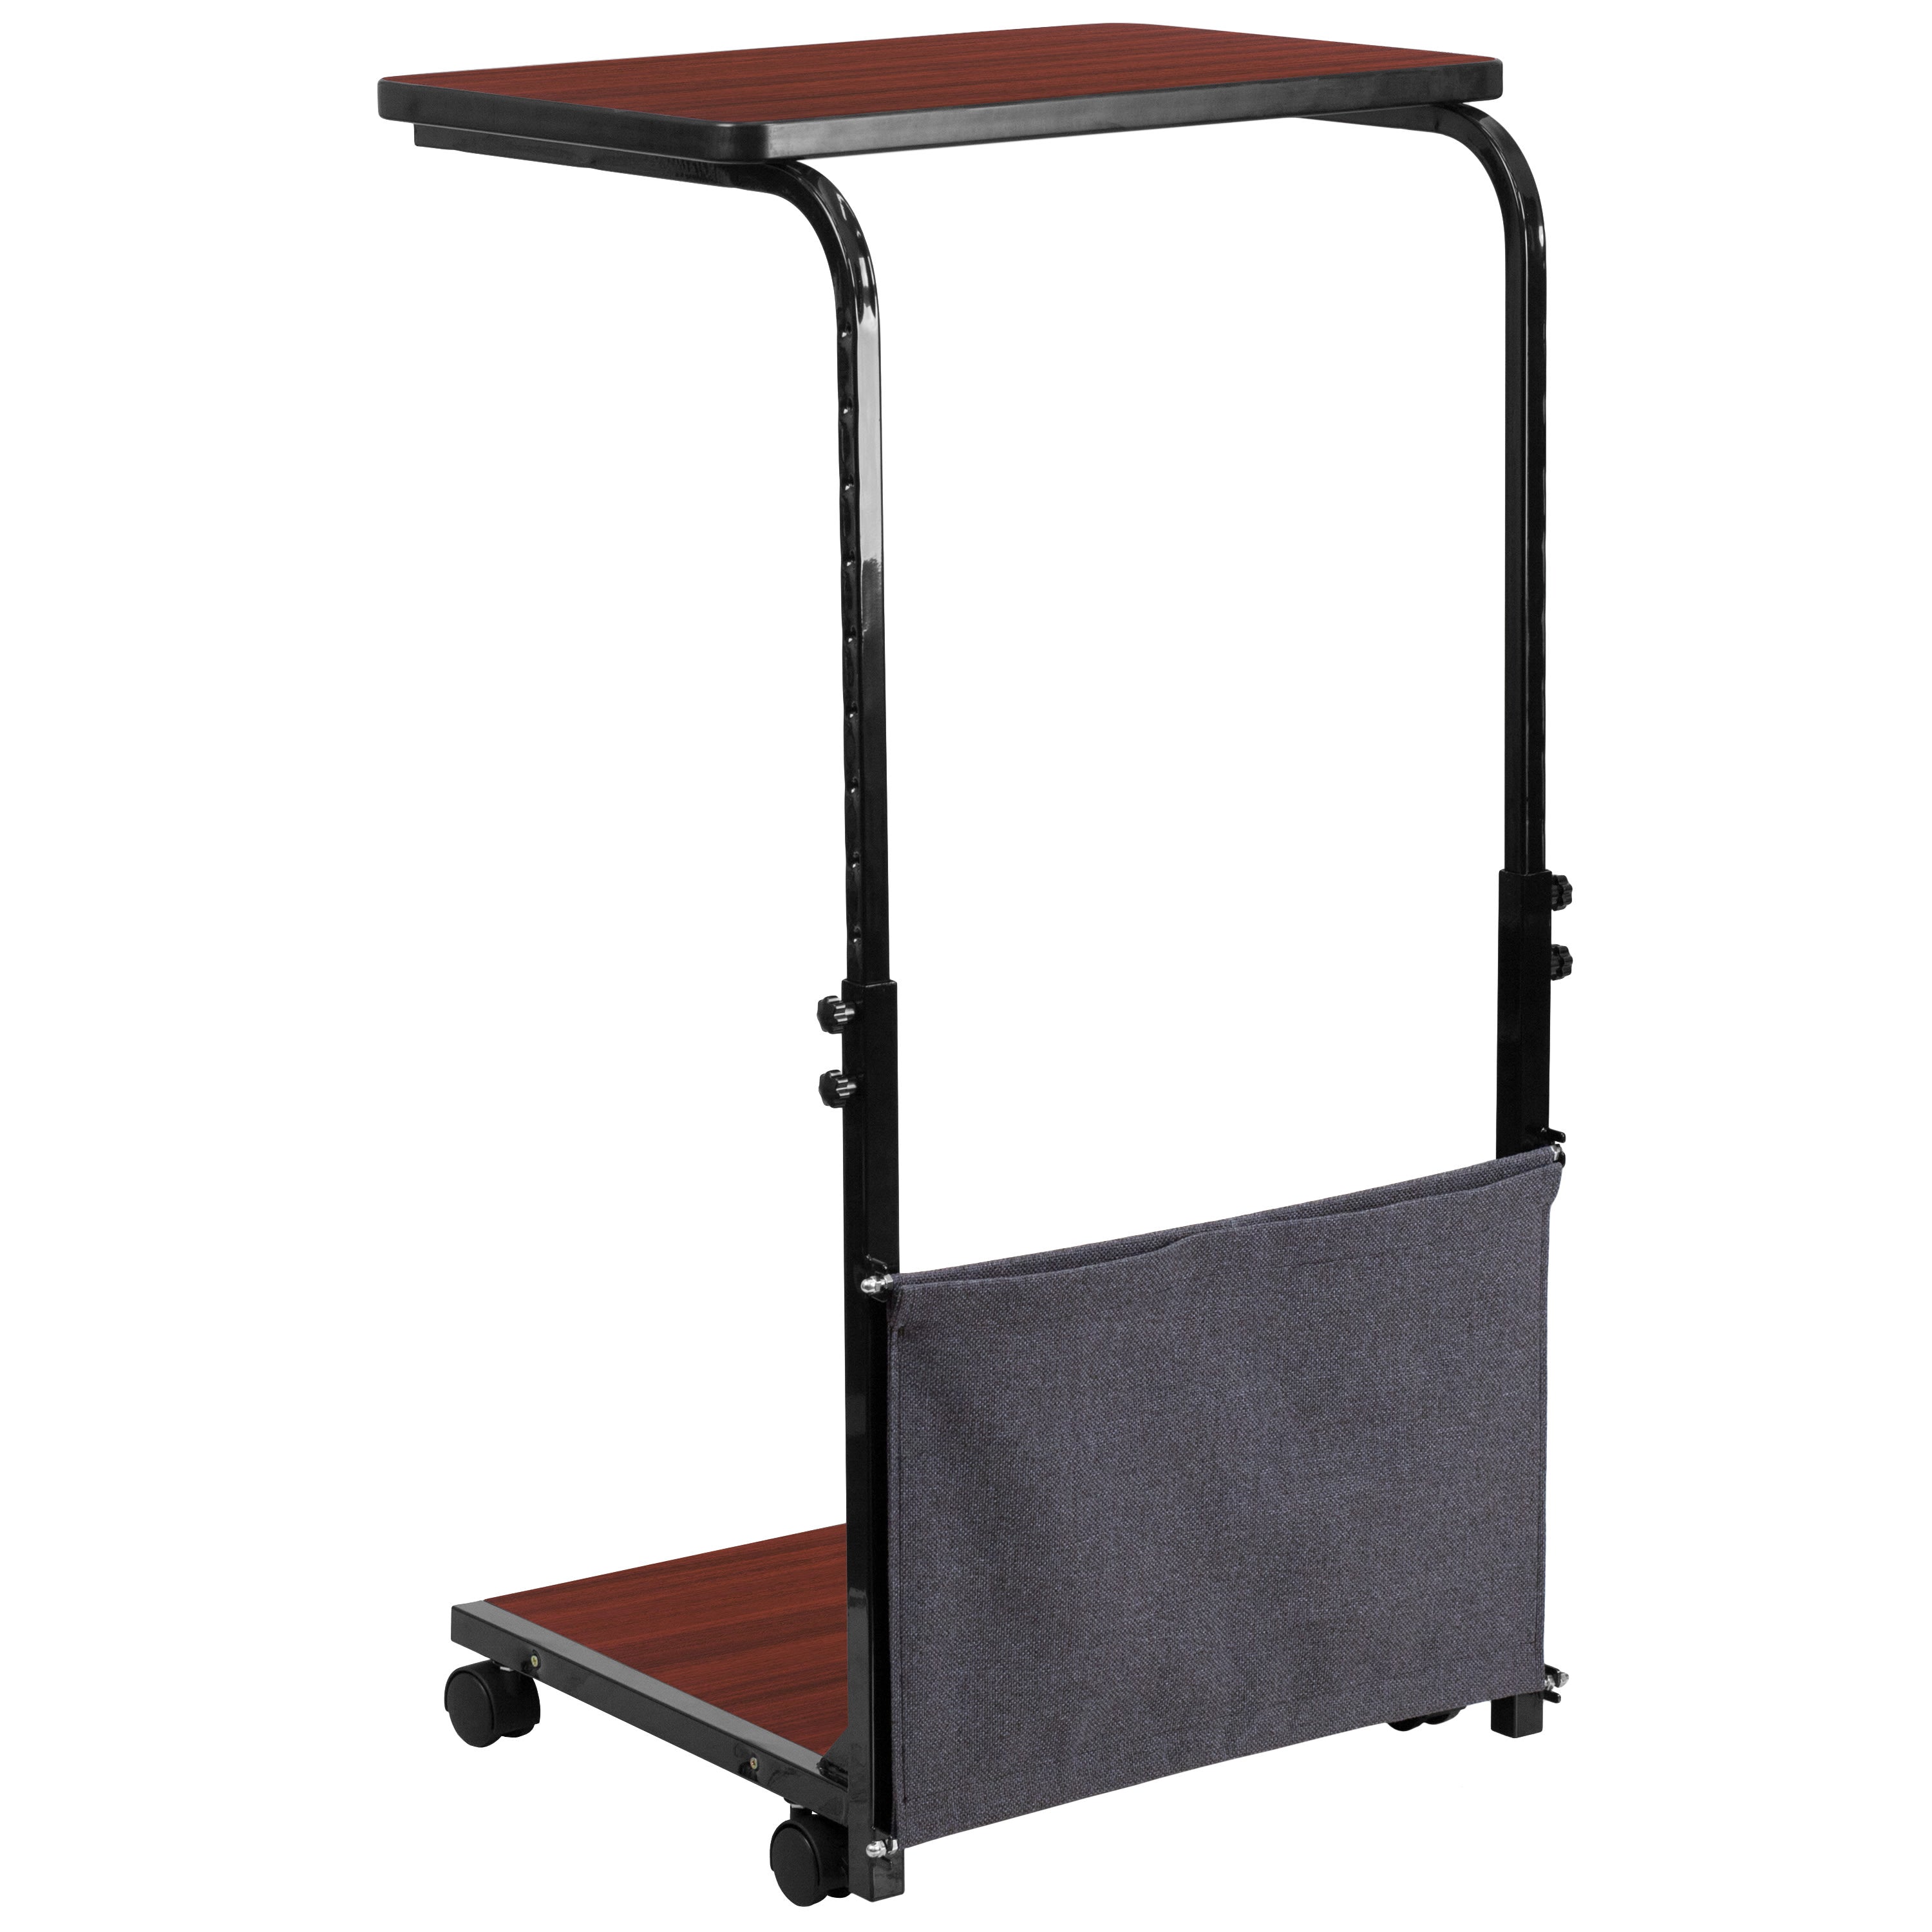 Mobile Sit-Down, Stand-Up Computer Ergonomic Desk with Removable Pouch (Adjustable Range 27' - 46.5')